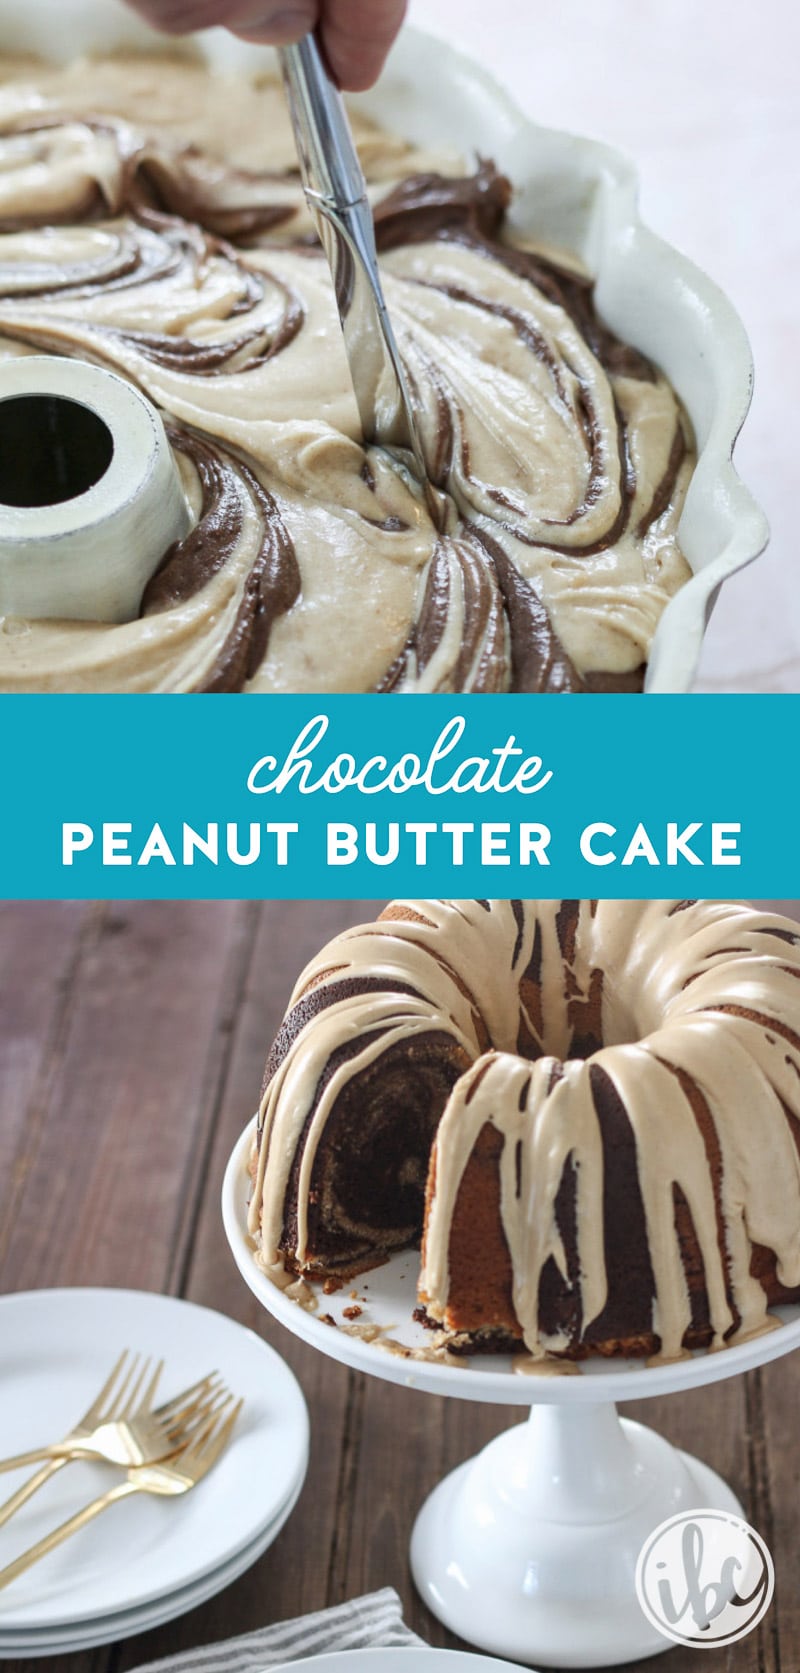 This Chocolate Peanut Butter Cake #dessert #recipe is a classic combination of flavors everyone will love! #chocolate #peanutbutter #cake